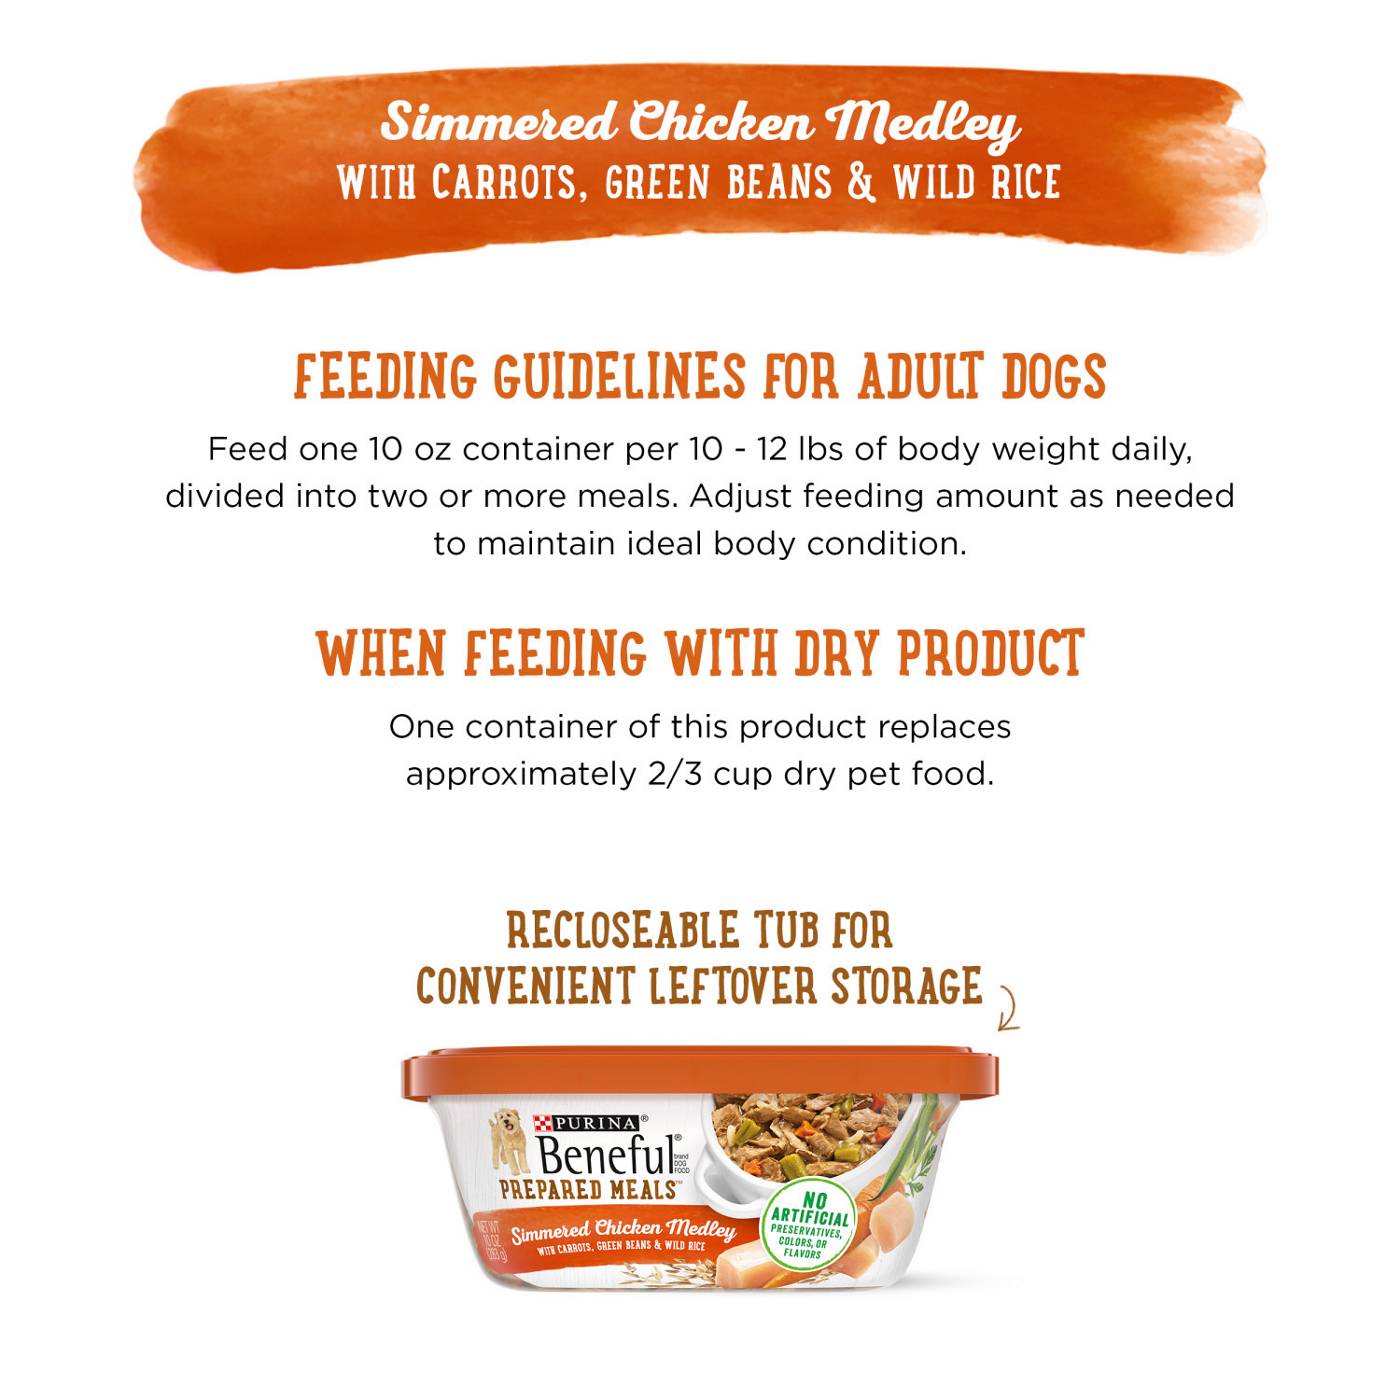 Beneful Purina Beneful High Protein Wet Dog Food With Gravy, Prepared Meals Simmered Chicken Medley; image 5 of 8